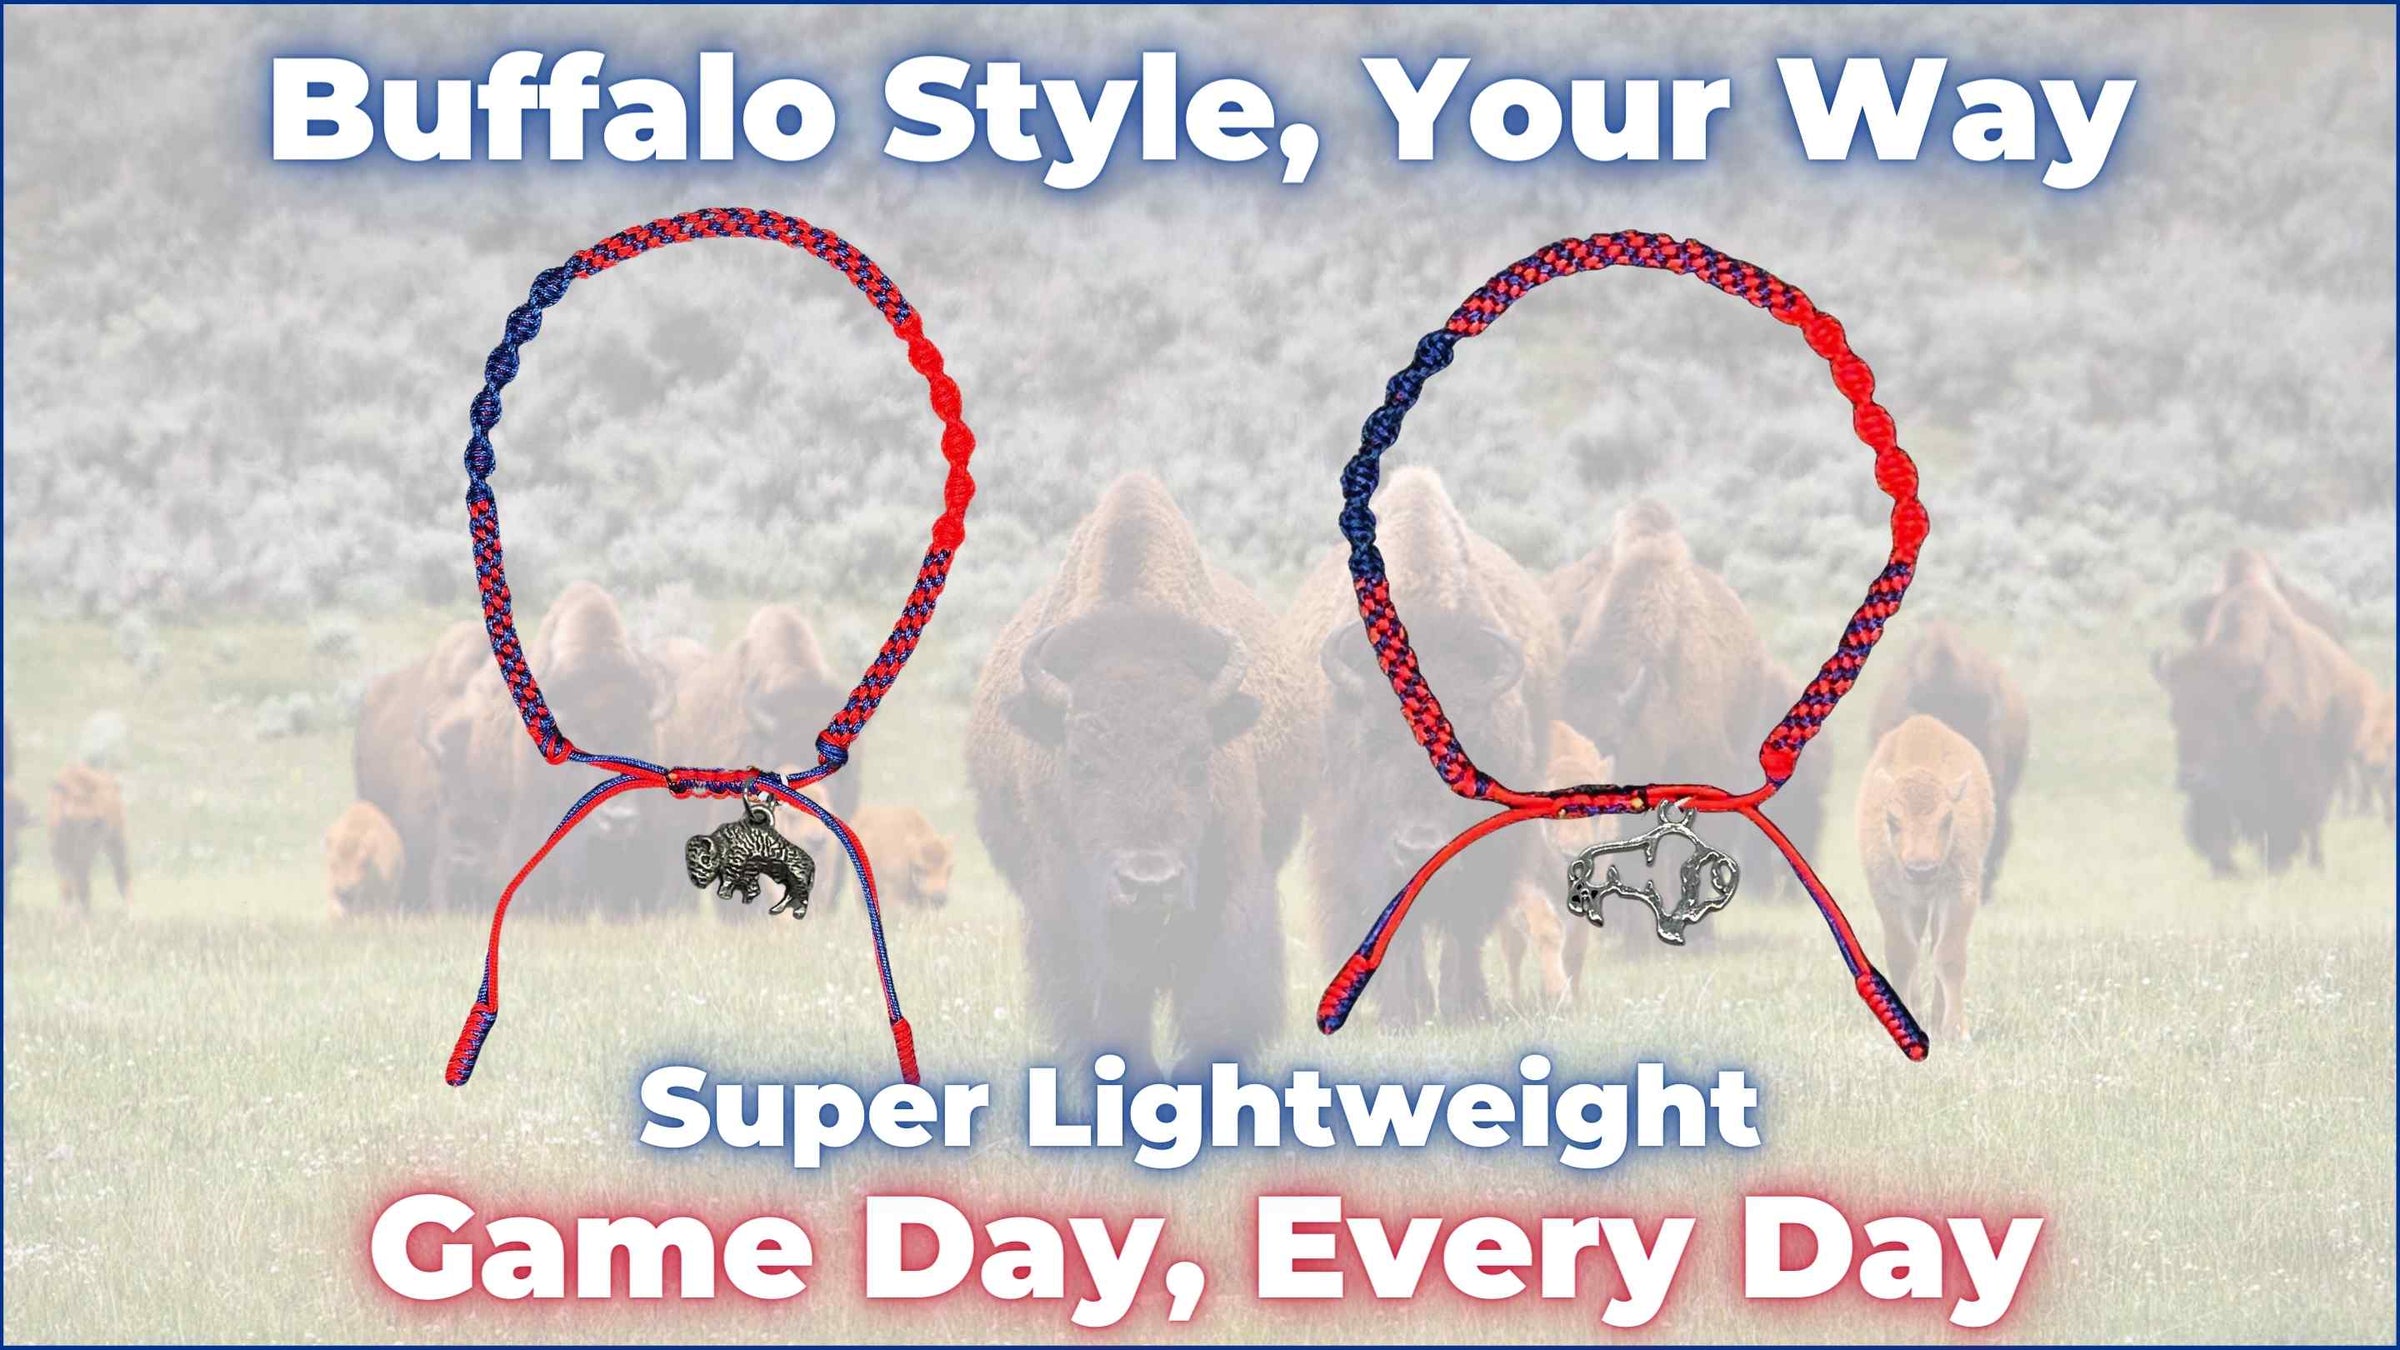 Unique Buffalo Gifts: Buffalo Bracelets, the perfect accessory for game day and everyday wear.